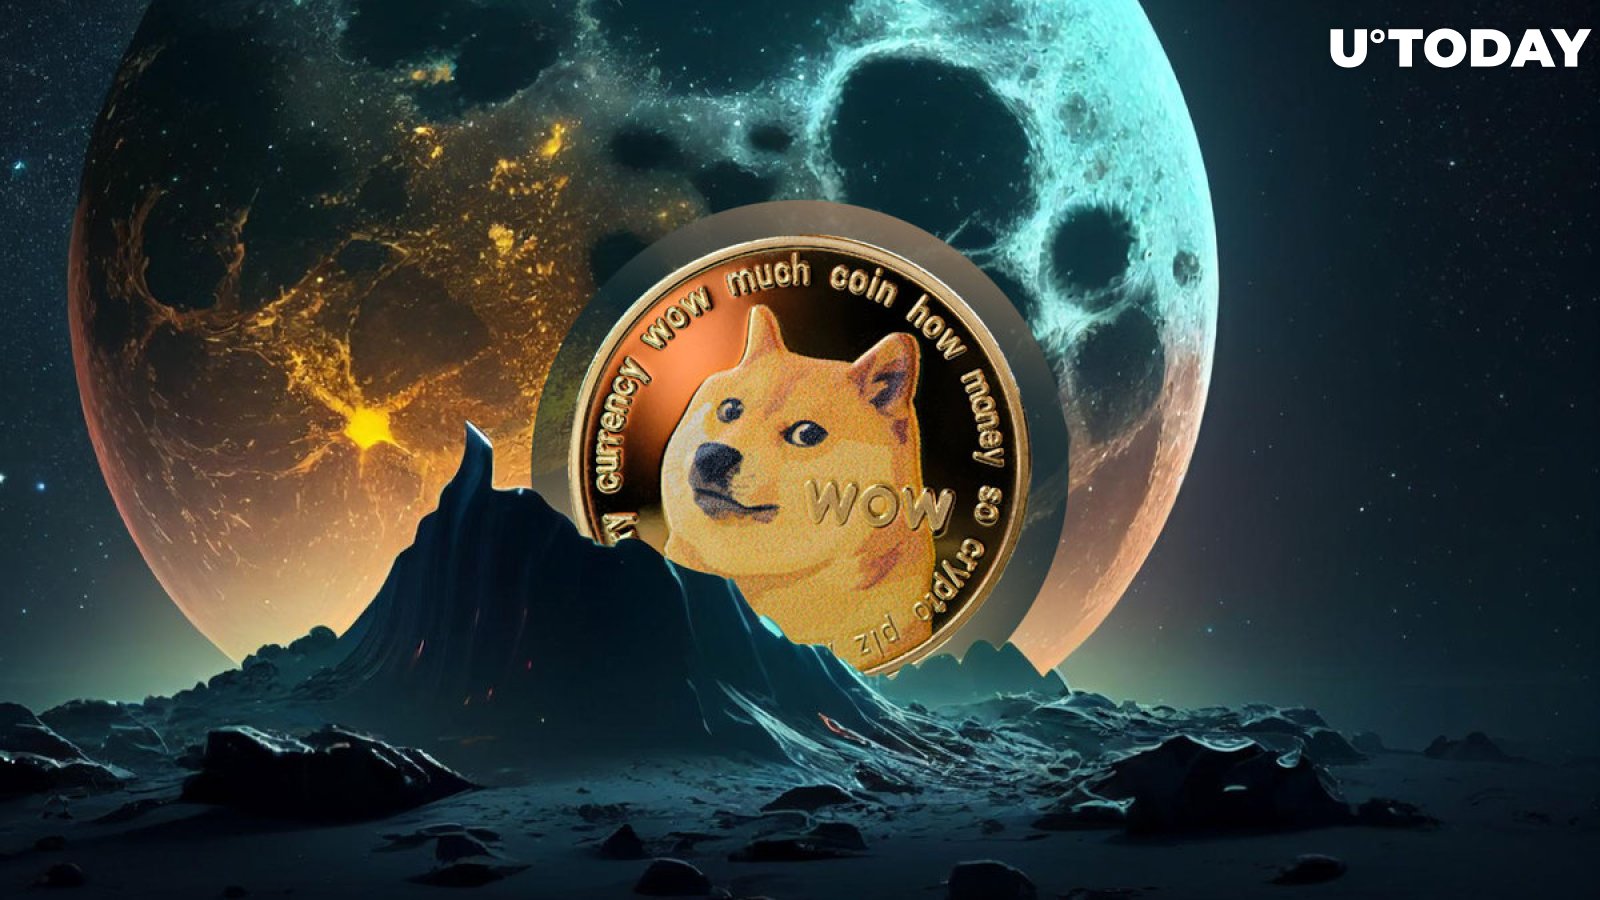 Dogecoin to Moon: 635 Million DOGE Change Hands Ahead of DOGE-1 Mission